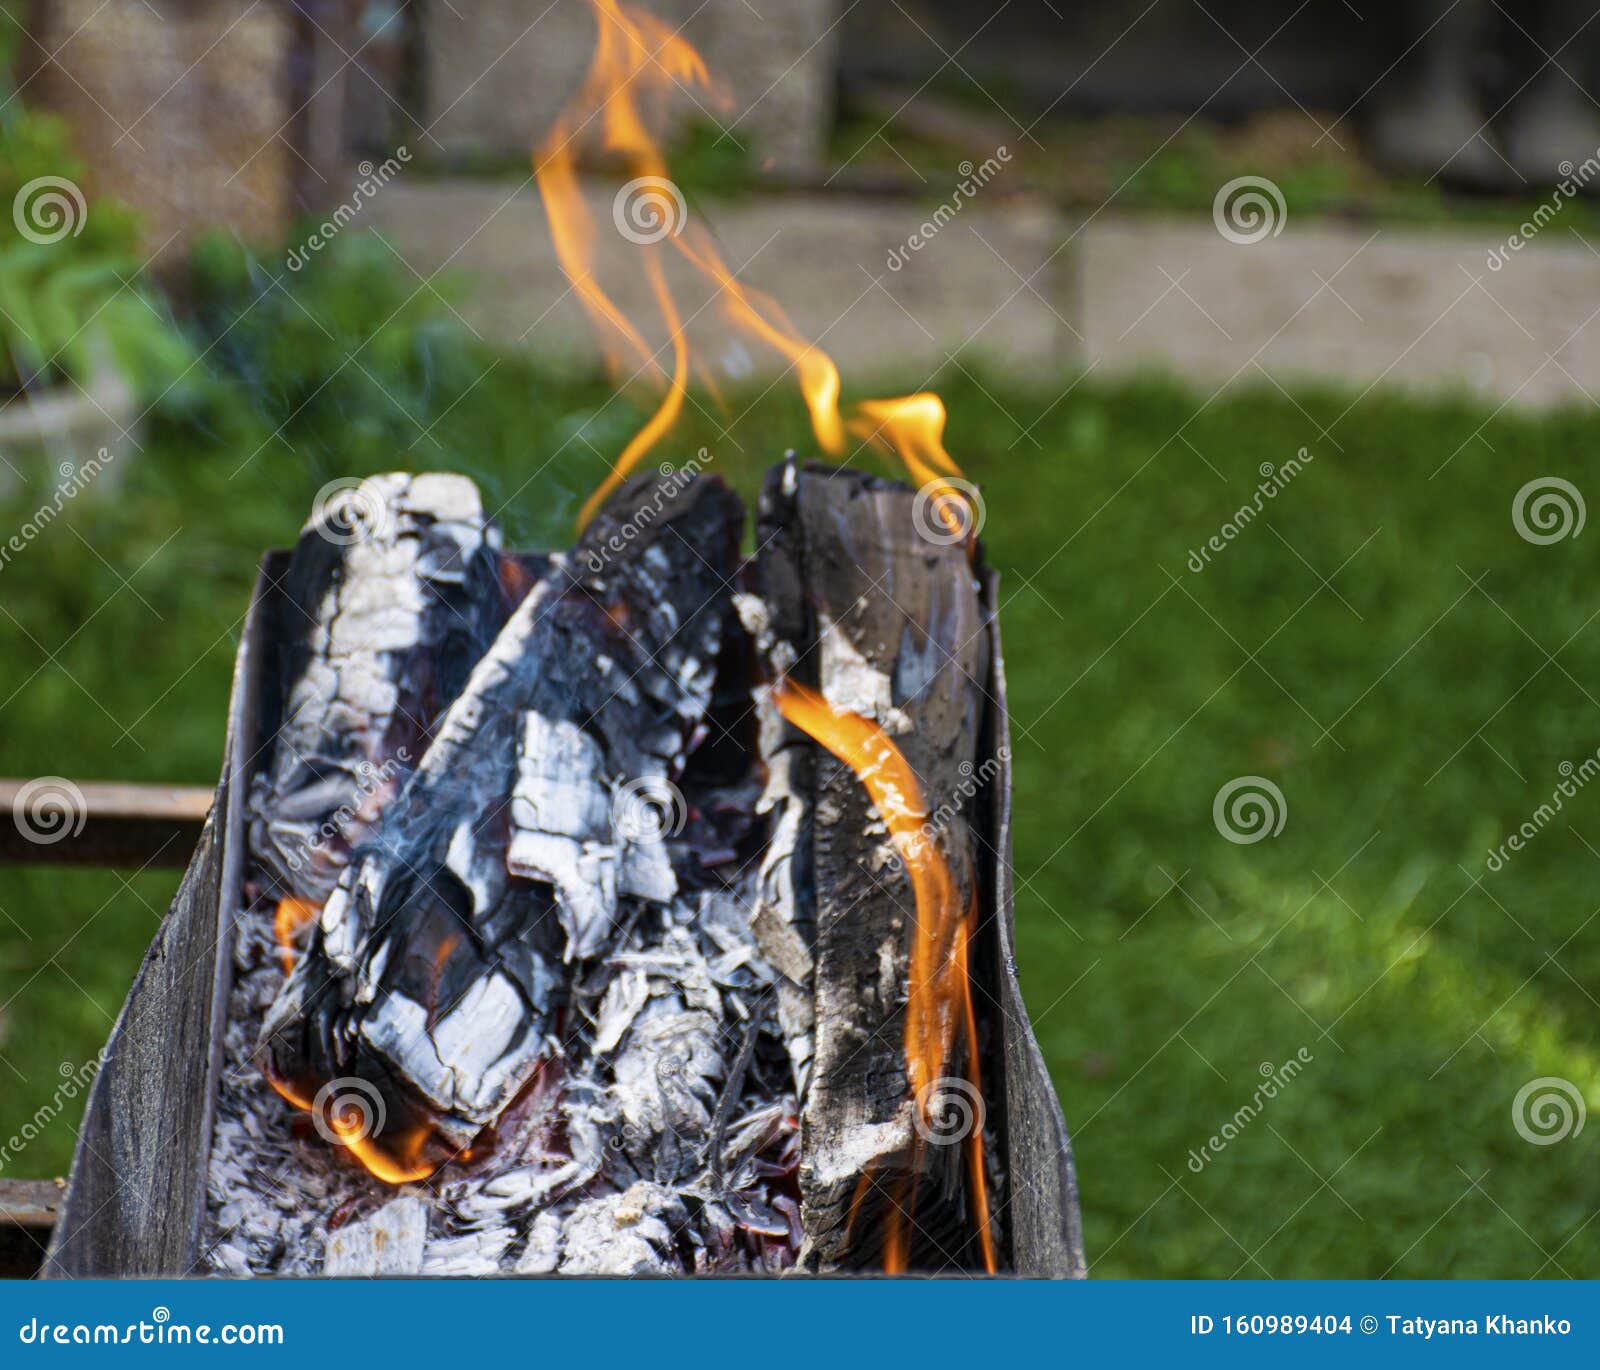 Fire and Smoke. Barbecue Firewood. Grill for Frying Meat. Bonfire on a ...